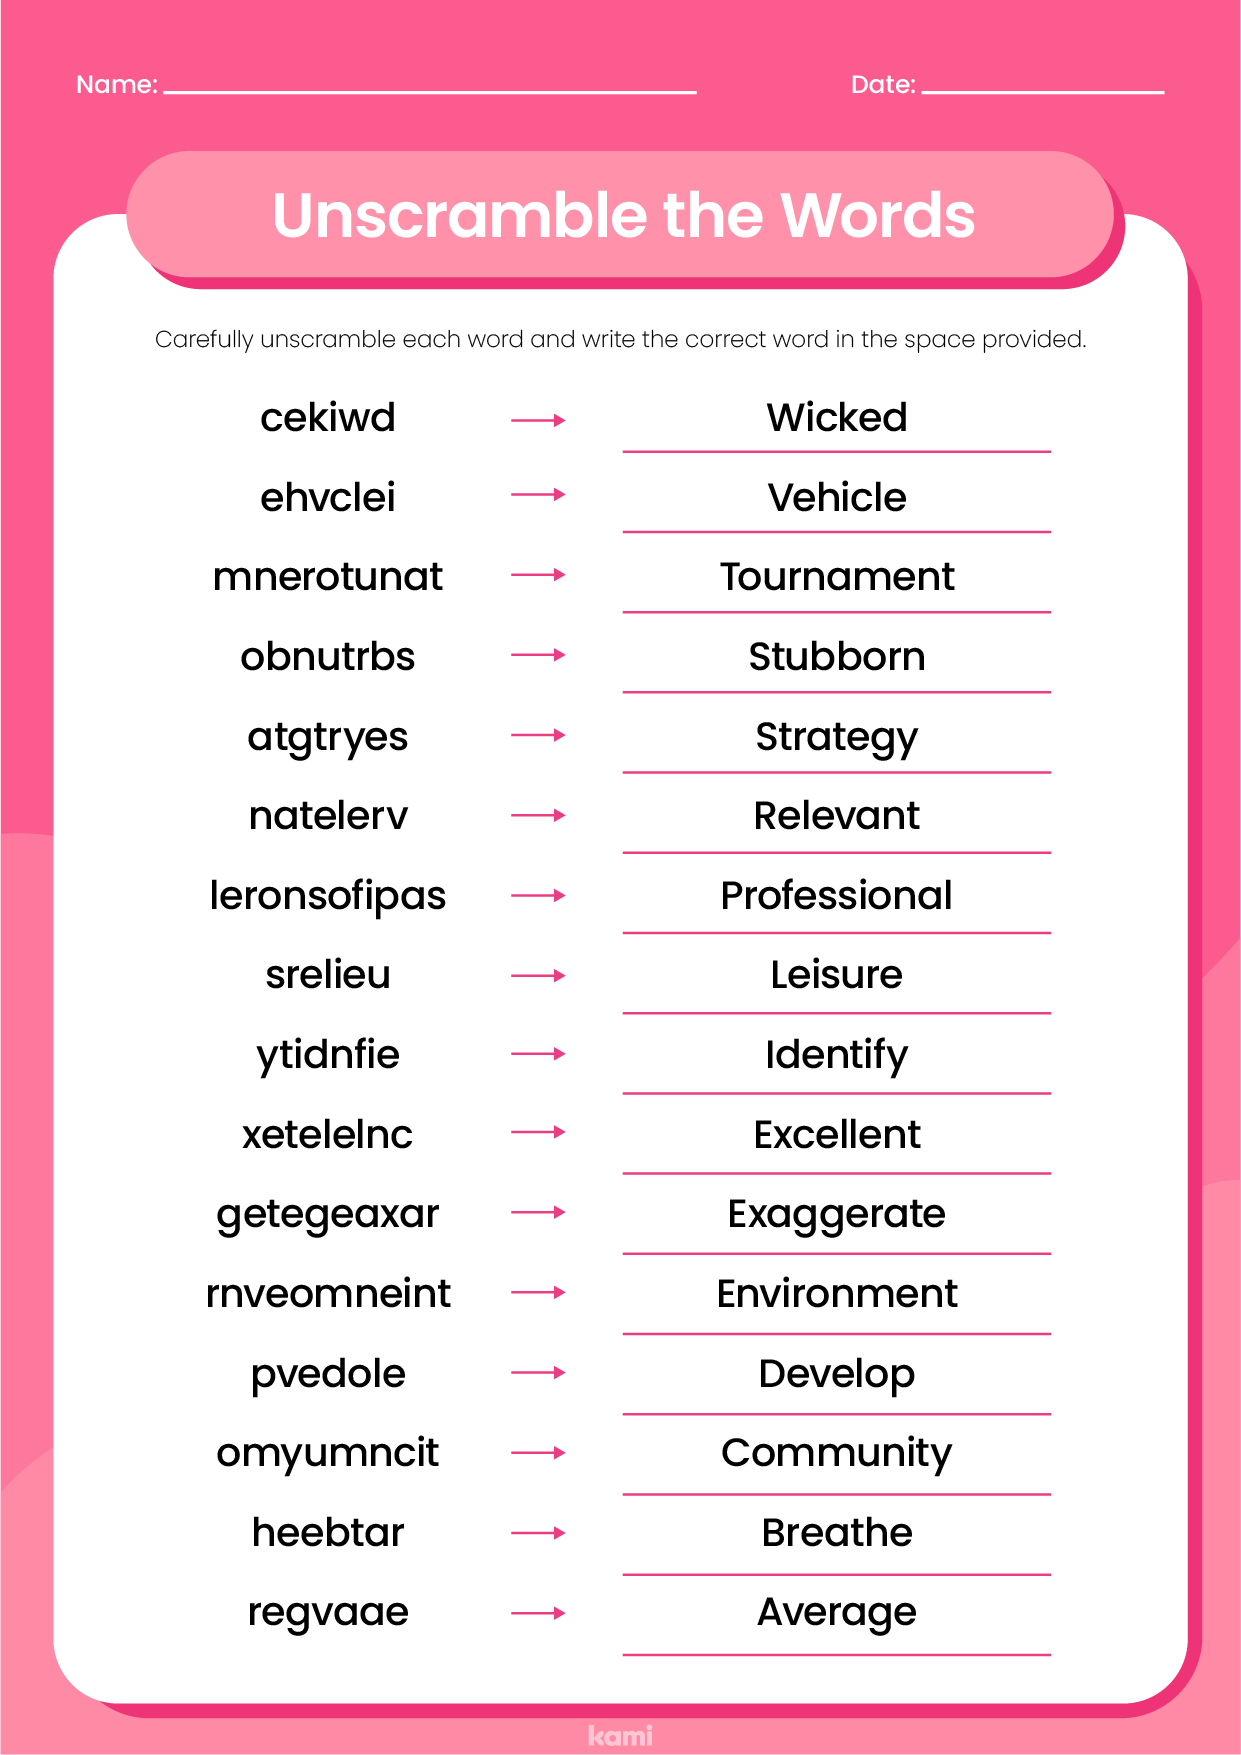 unscramble-the-words-worksheet-answer-key-for-teachers-perfect-for